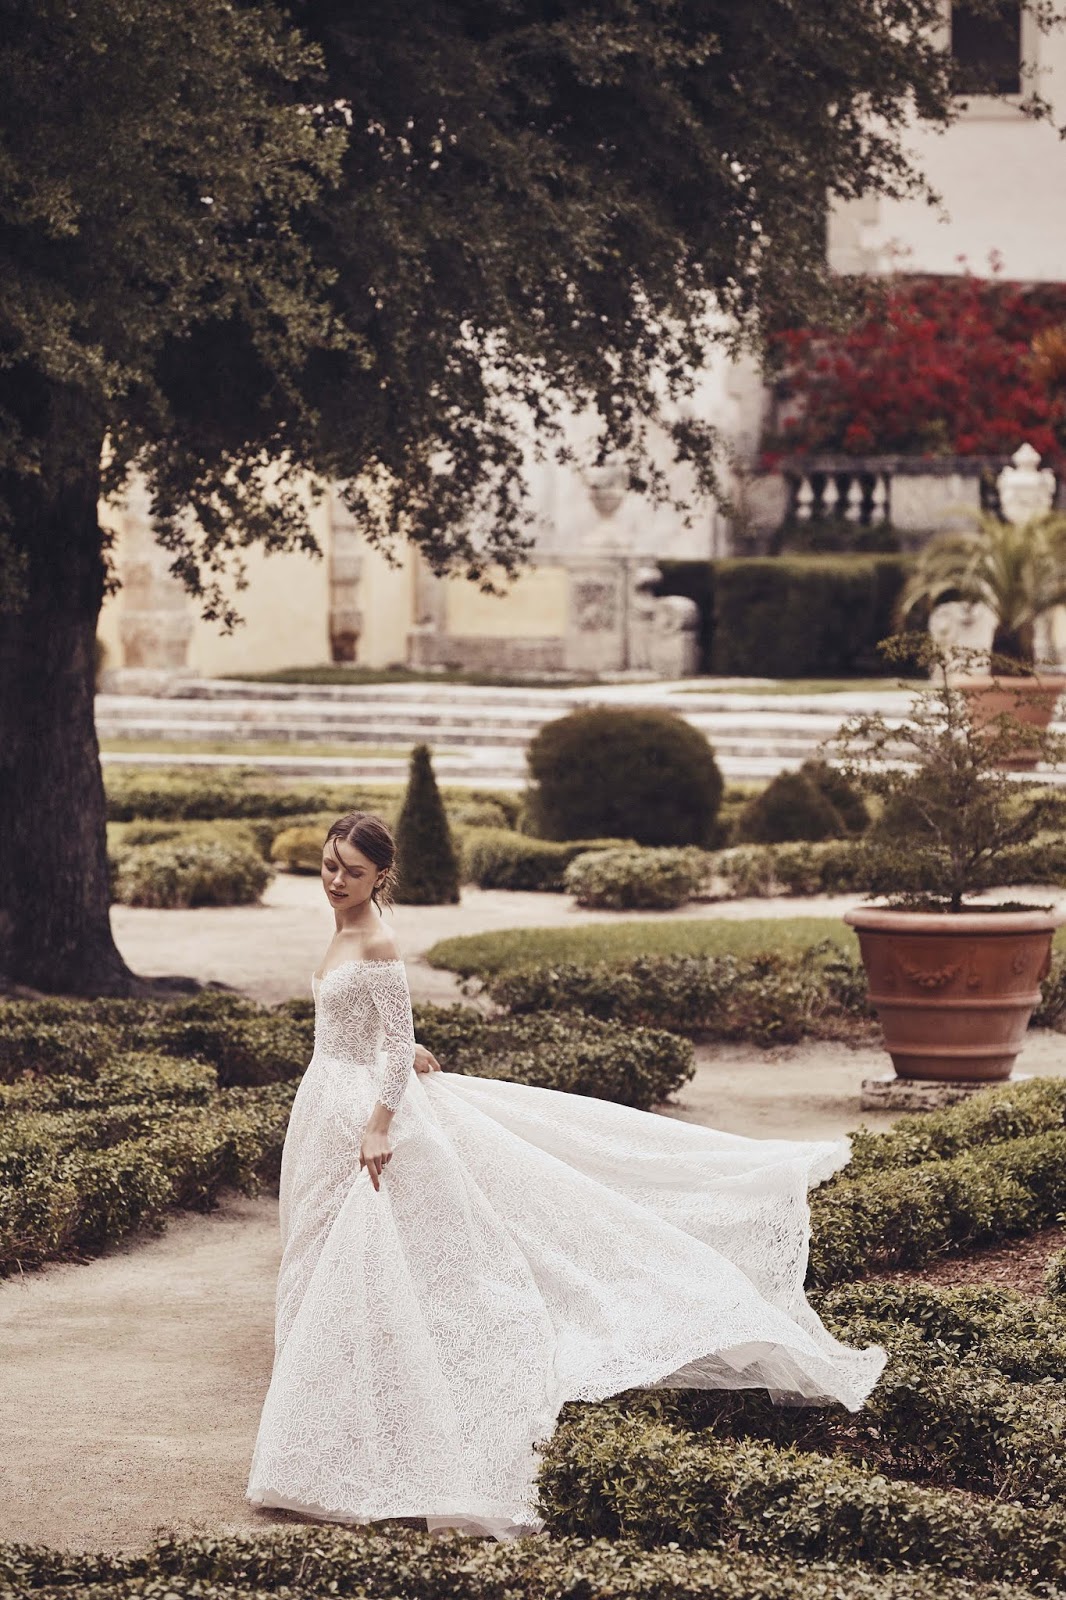 Dreamy Wedding Gowns by MONIQUE LHUILLIER